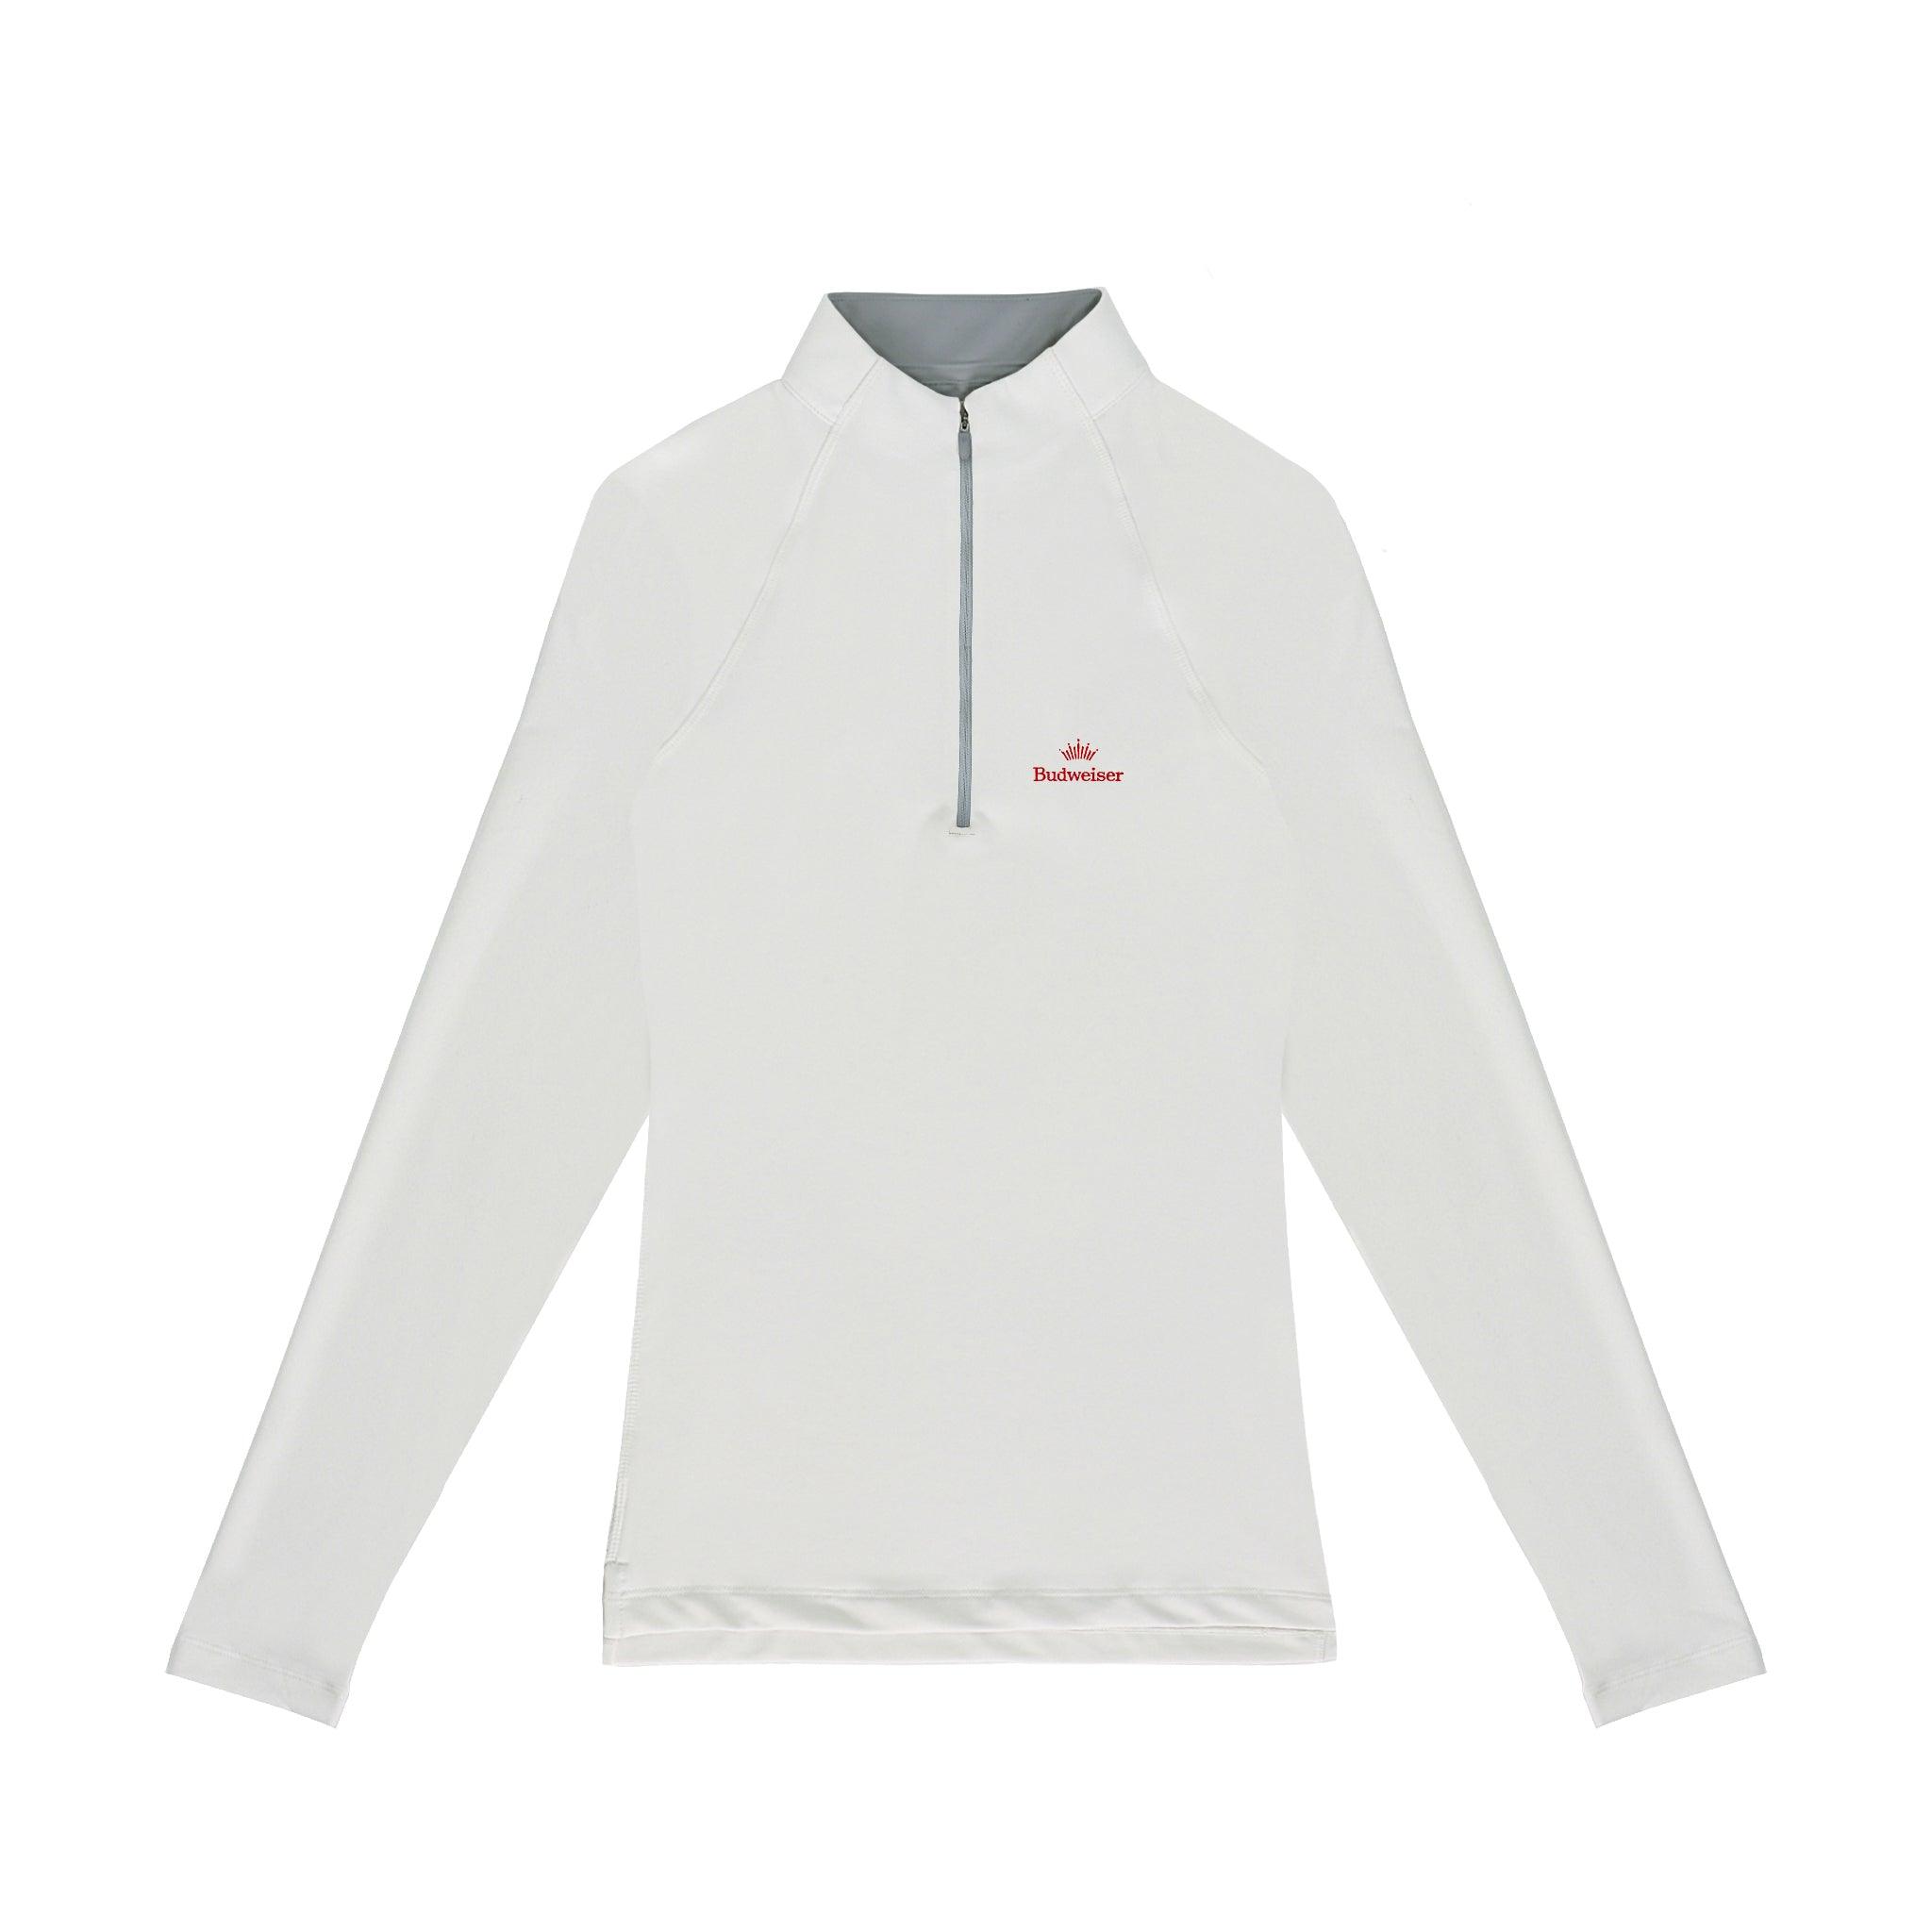 front of mens 1/4 zip with Budweiser logo on chest 